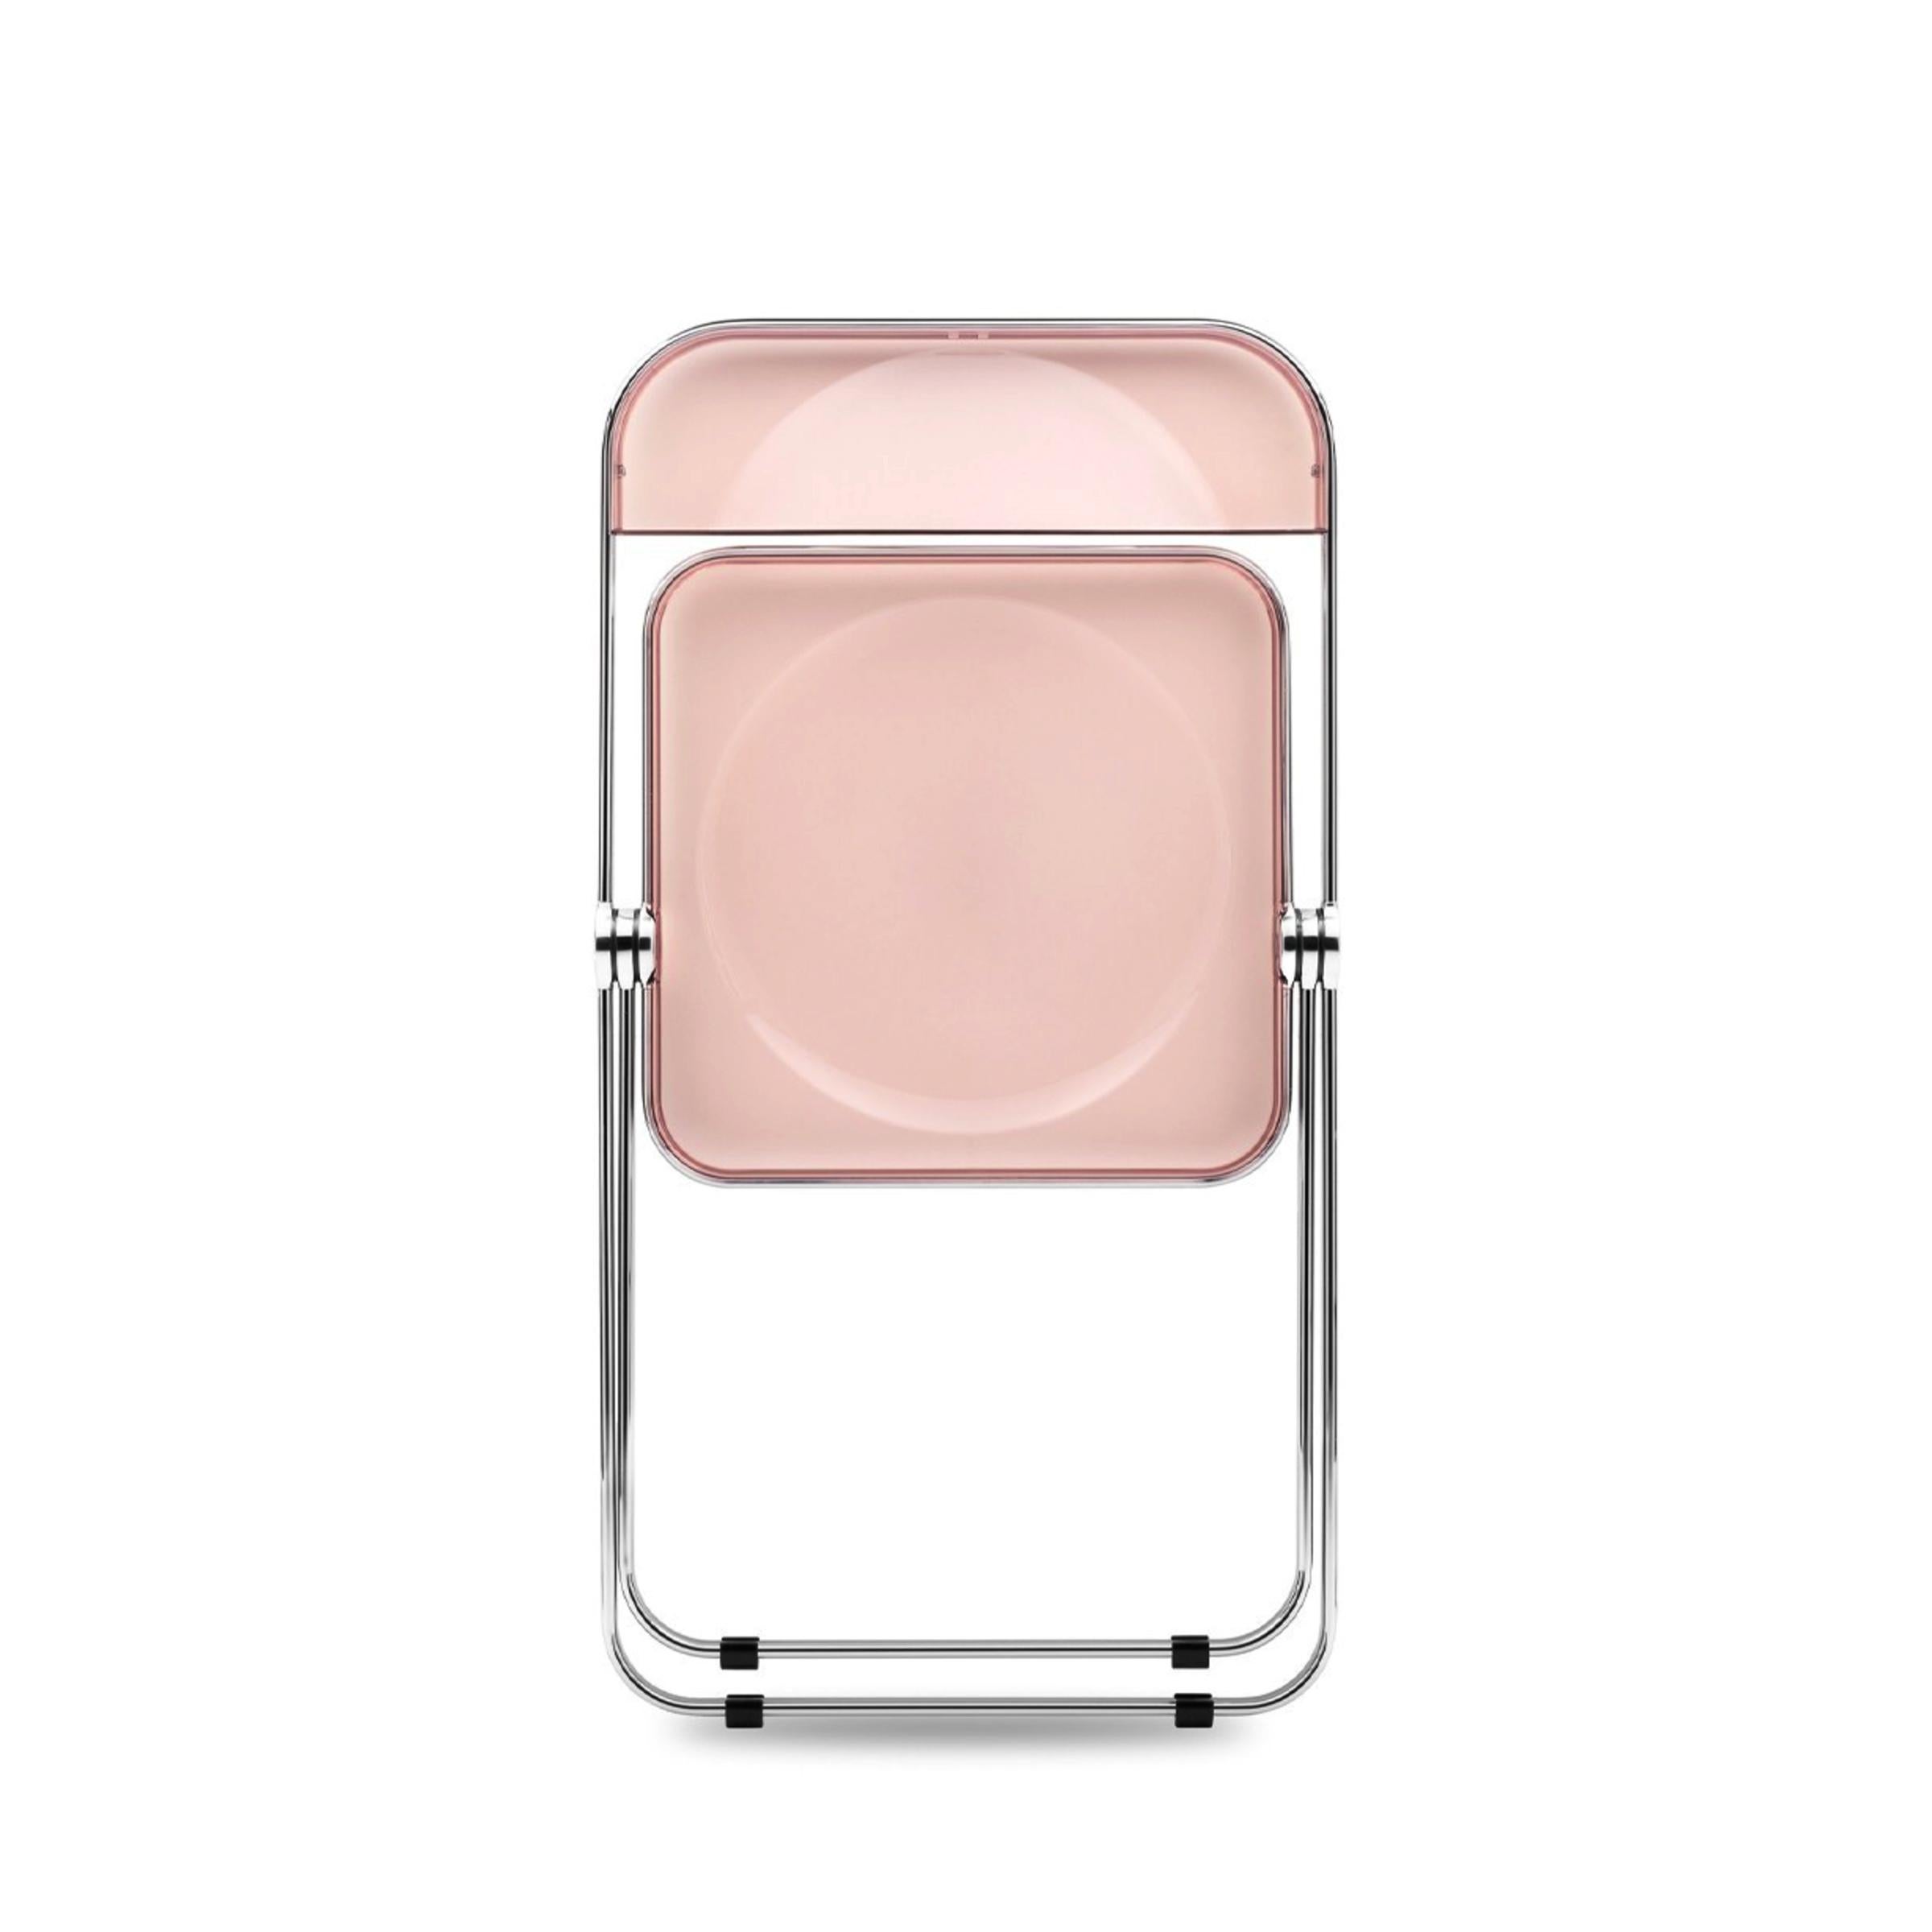 Set of 4 Lucite Pink and Chrome Plia Chairs, Piretti for Castelli, Italy 1970s For Sale 6